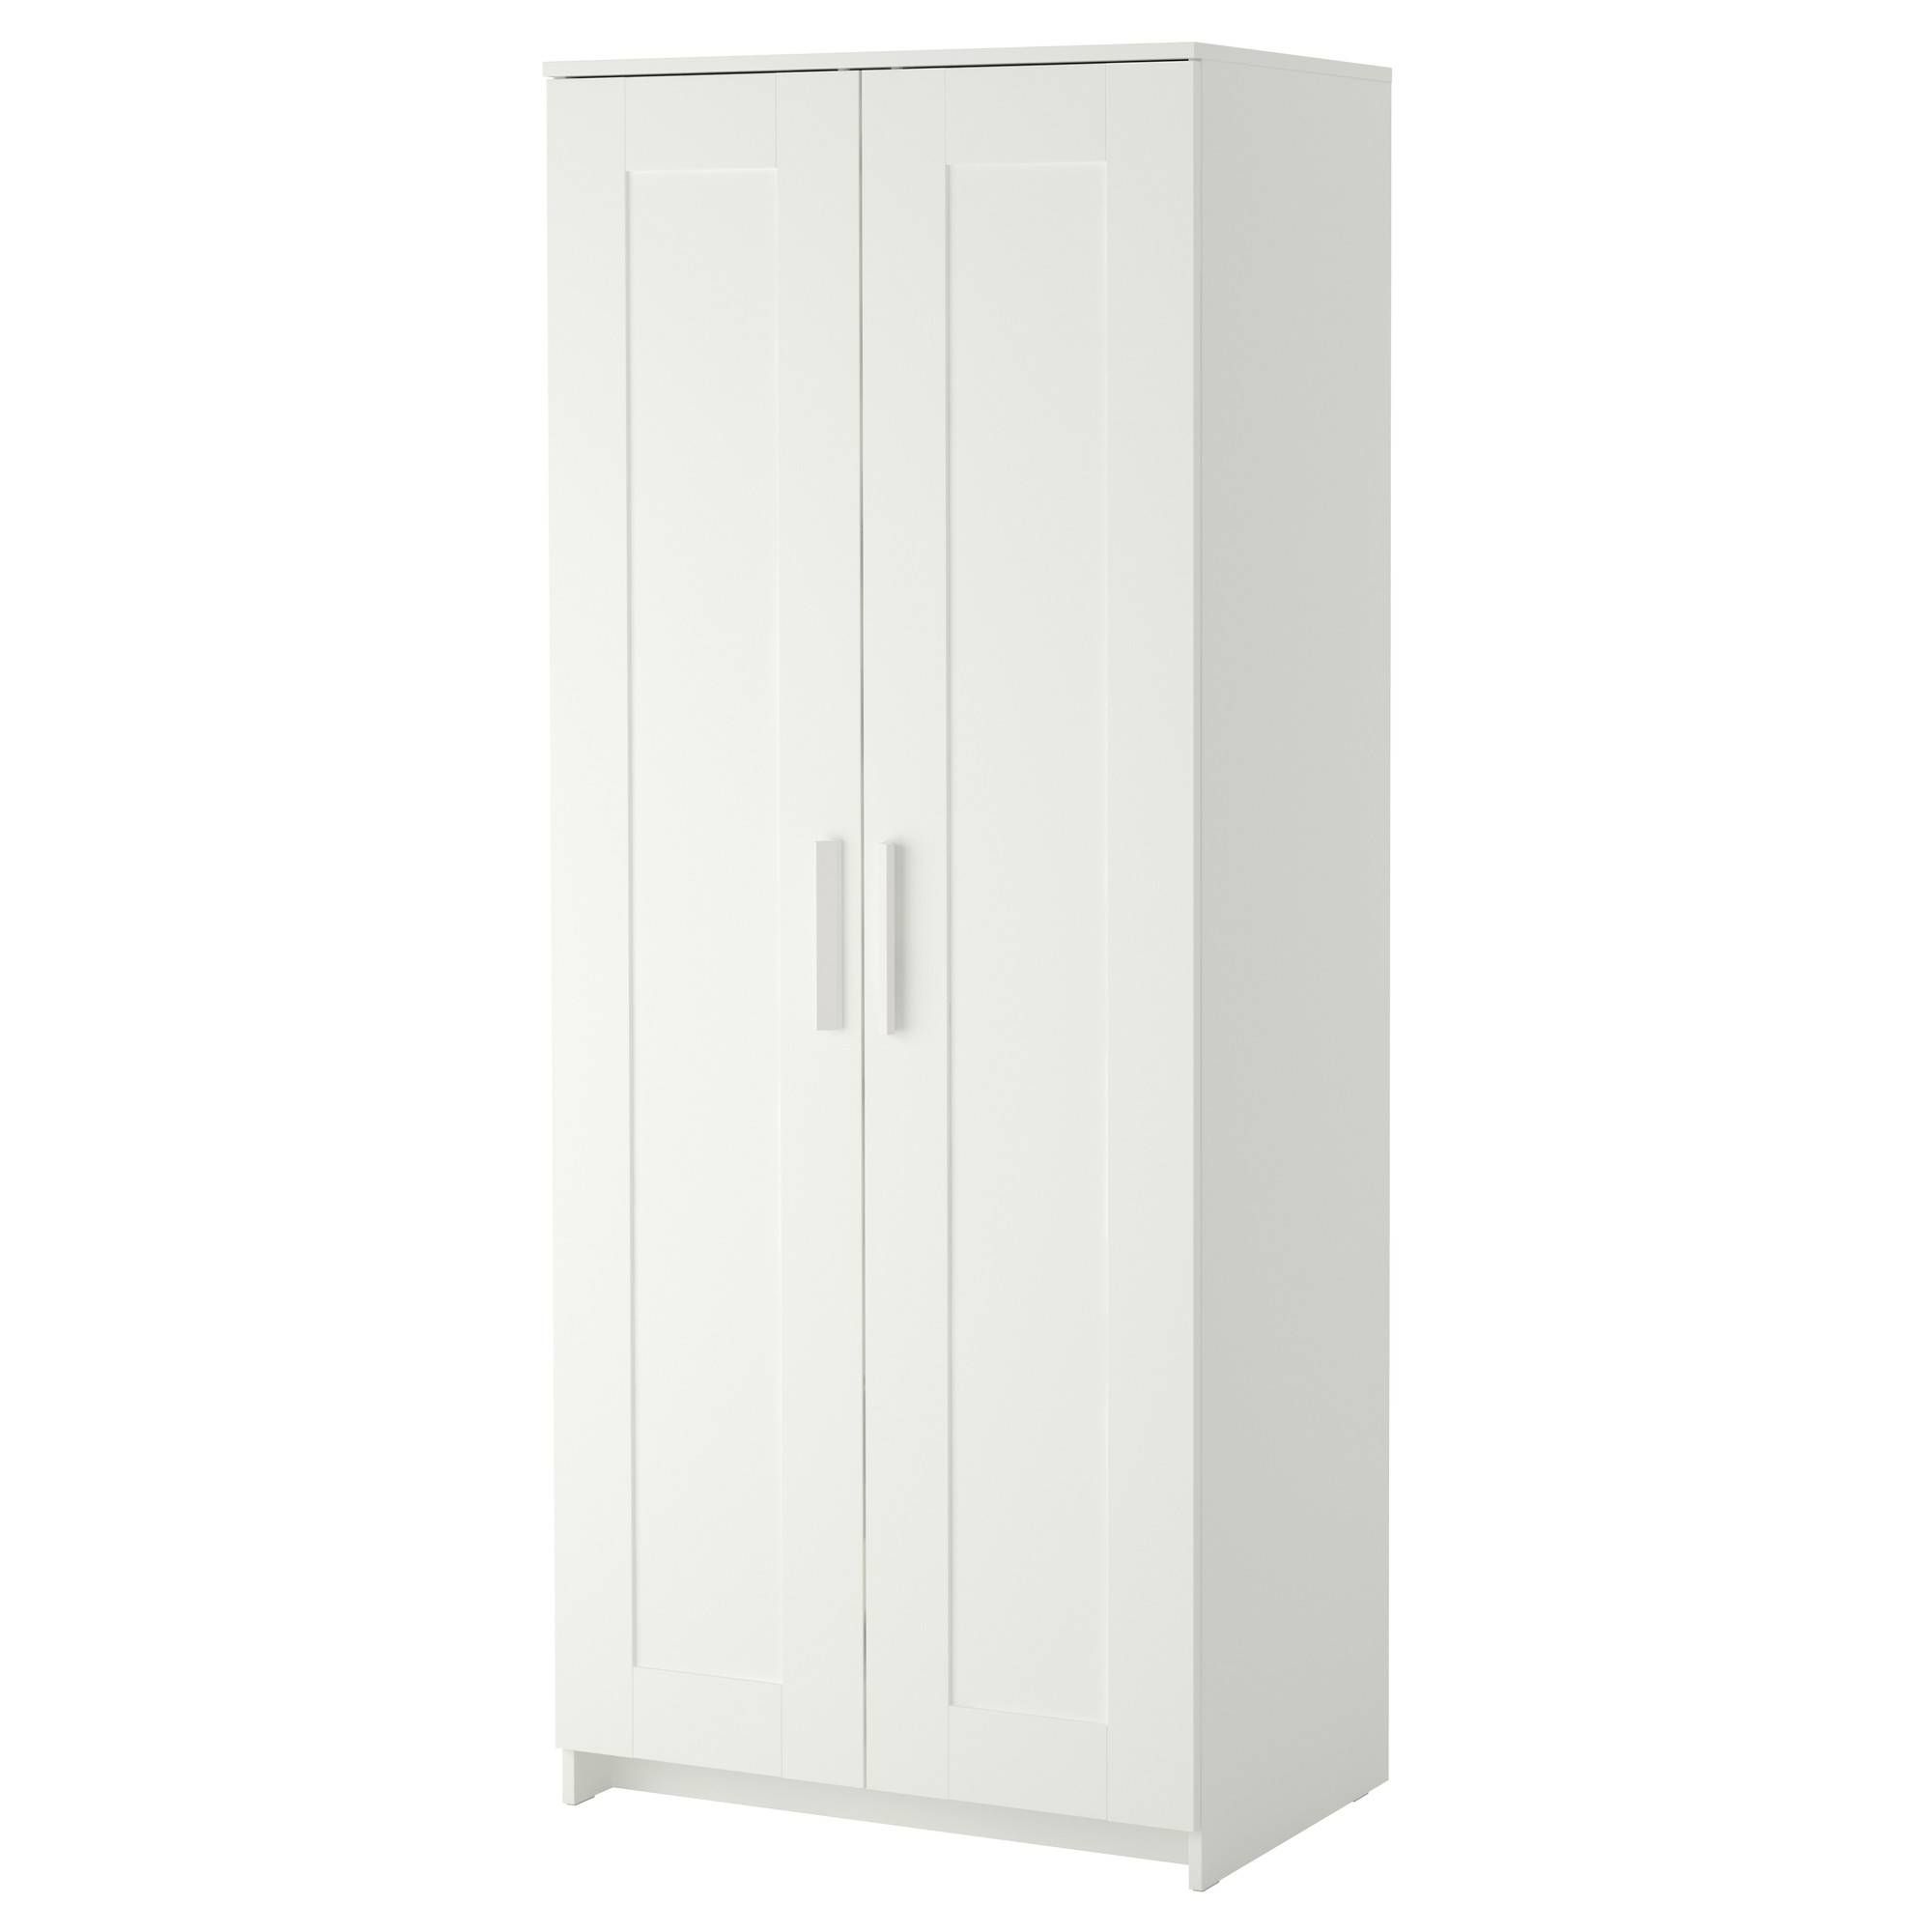 Free Standing Wardrobes | Ikea Pertaining To Tall White Wardrobes (View 9 of 15)